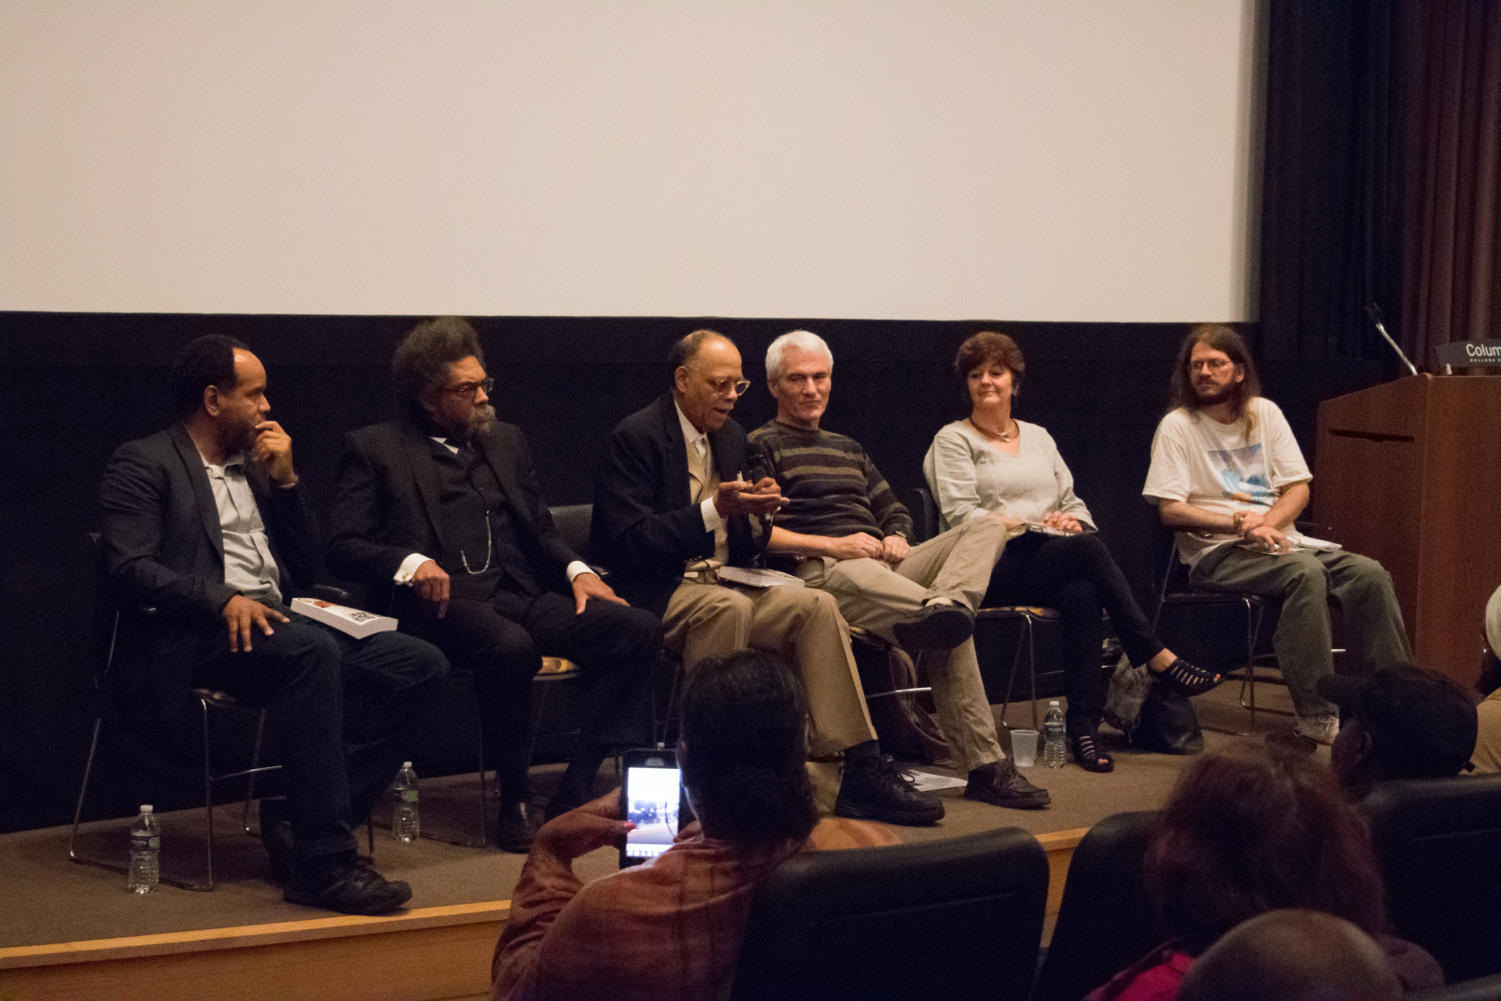 Writers give a panel discussion entitled 